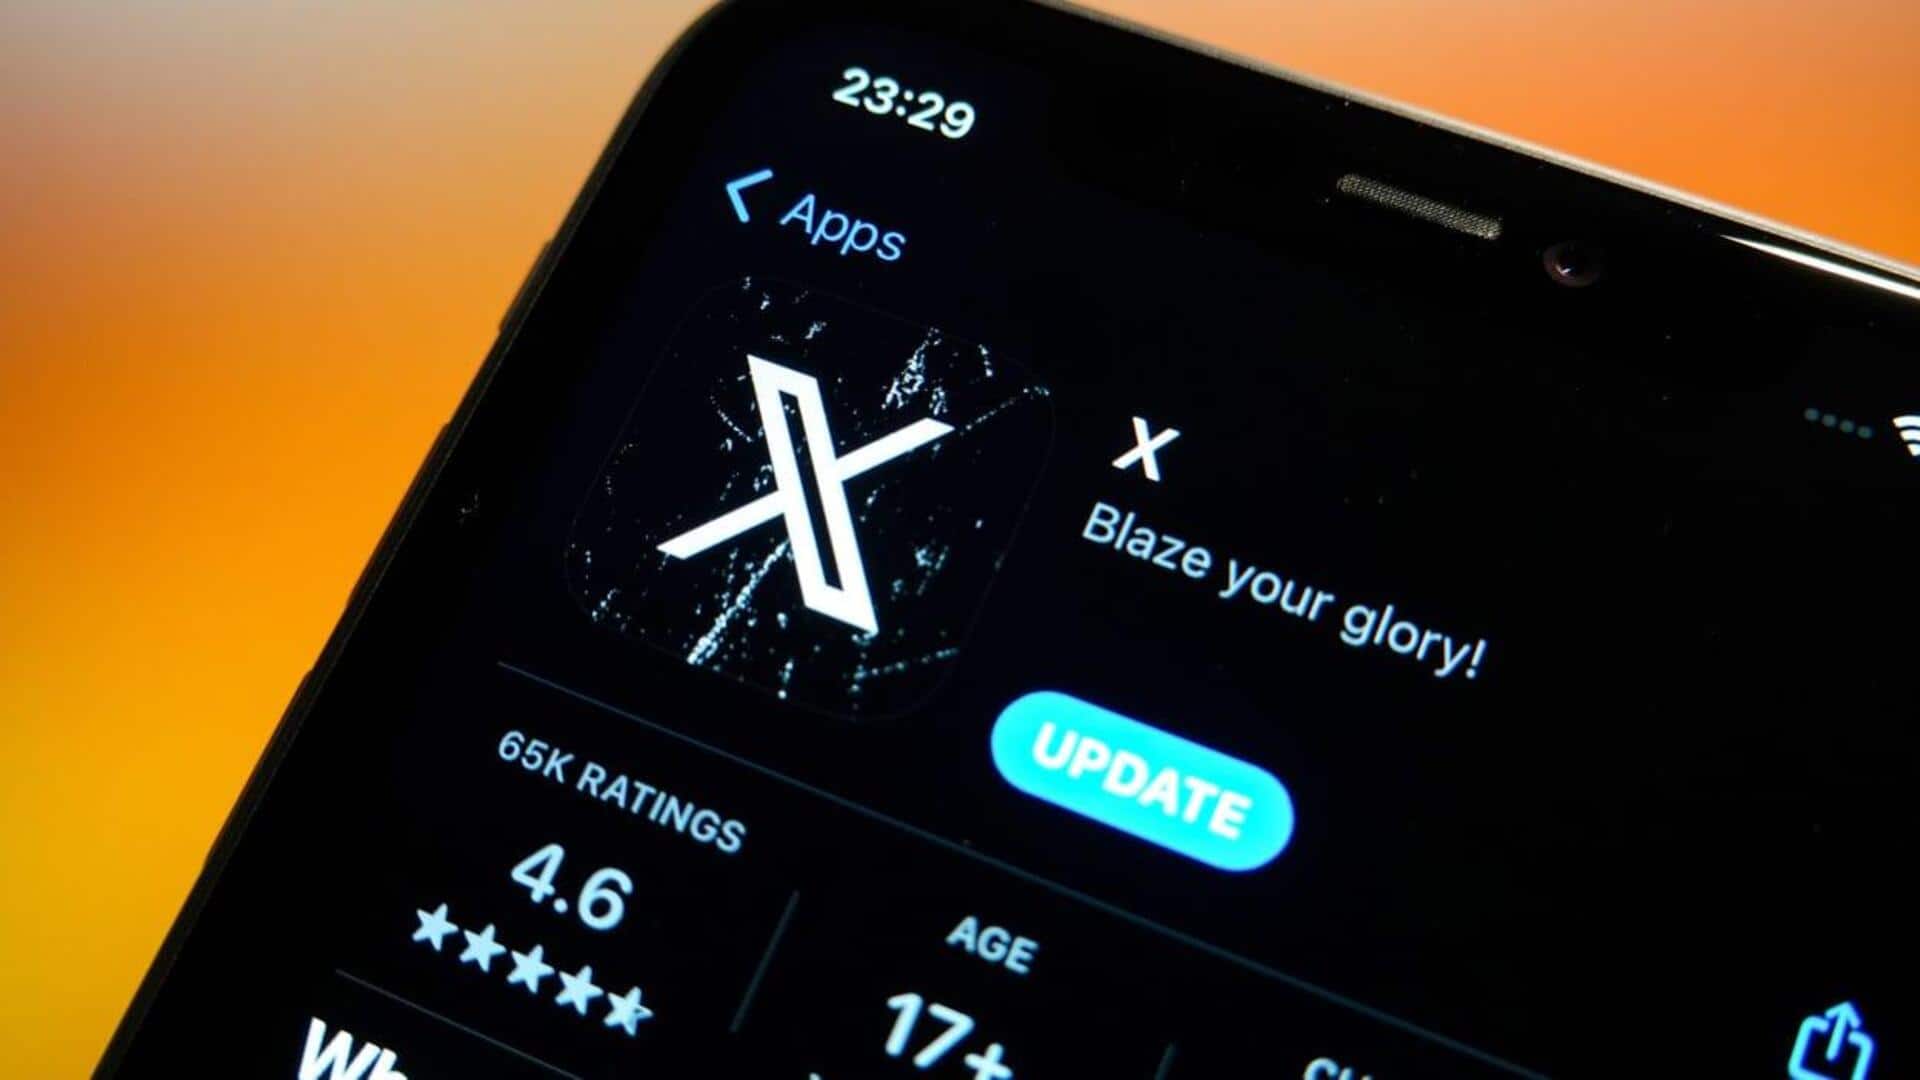 X tops Apple App Store amid Drake's nude video scandal